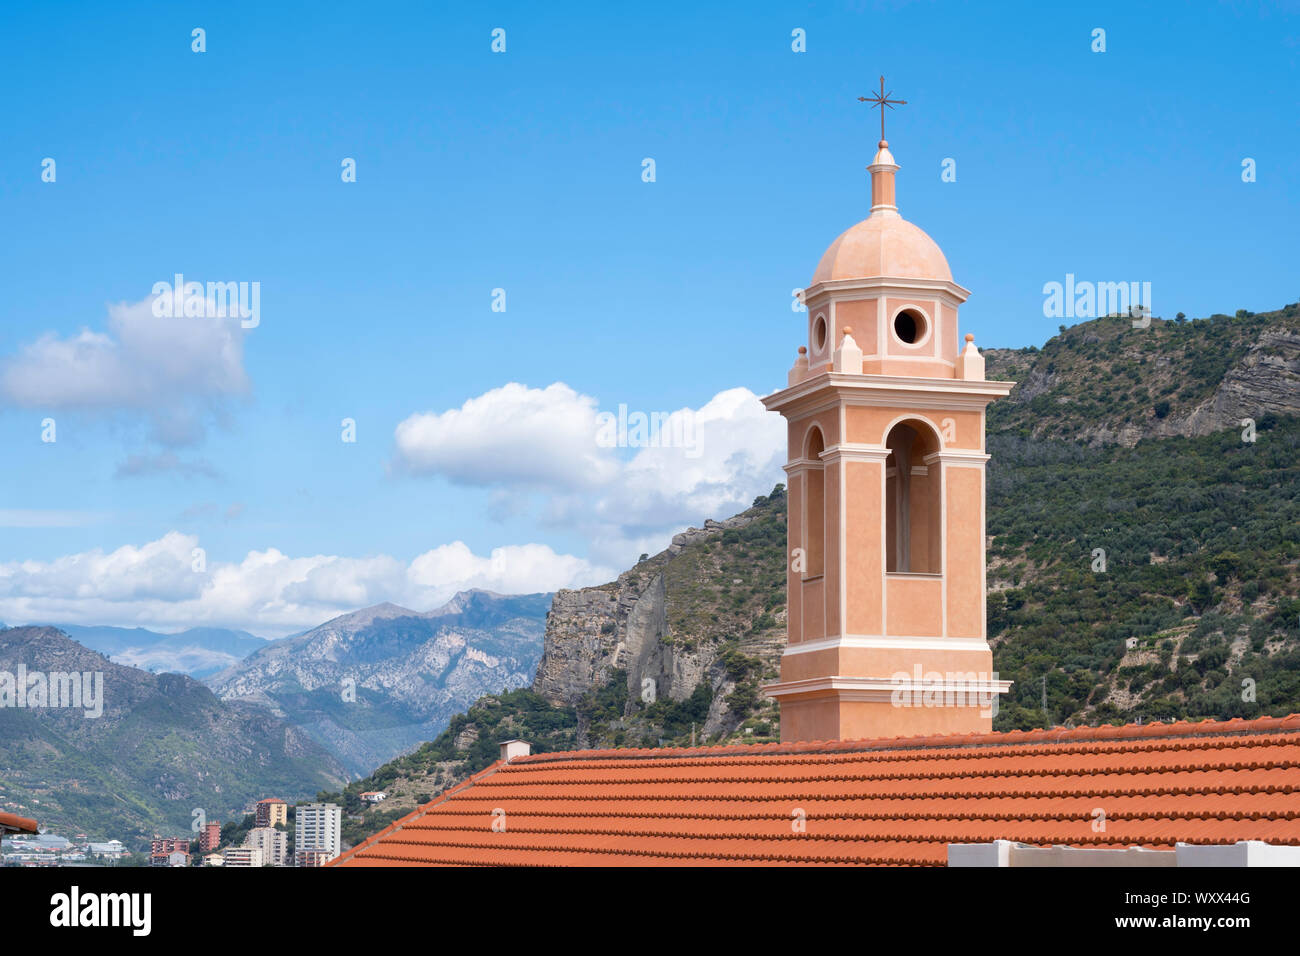 The bell tower of the church of Santa Marta in Ventimiglia with a mountainous landscape behind, Liguria, Italy, Europe Stock Photo